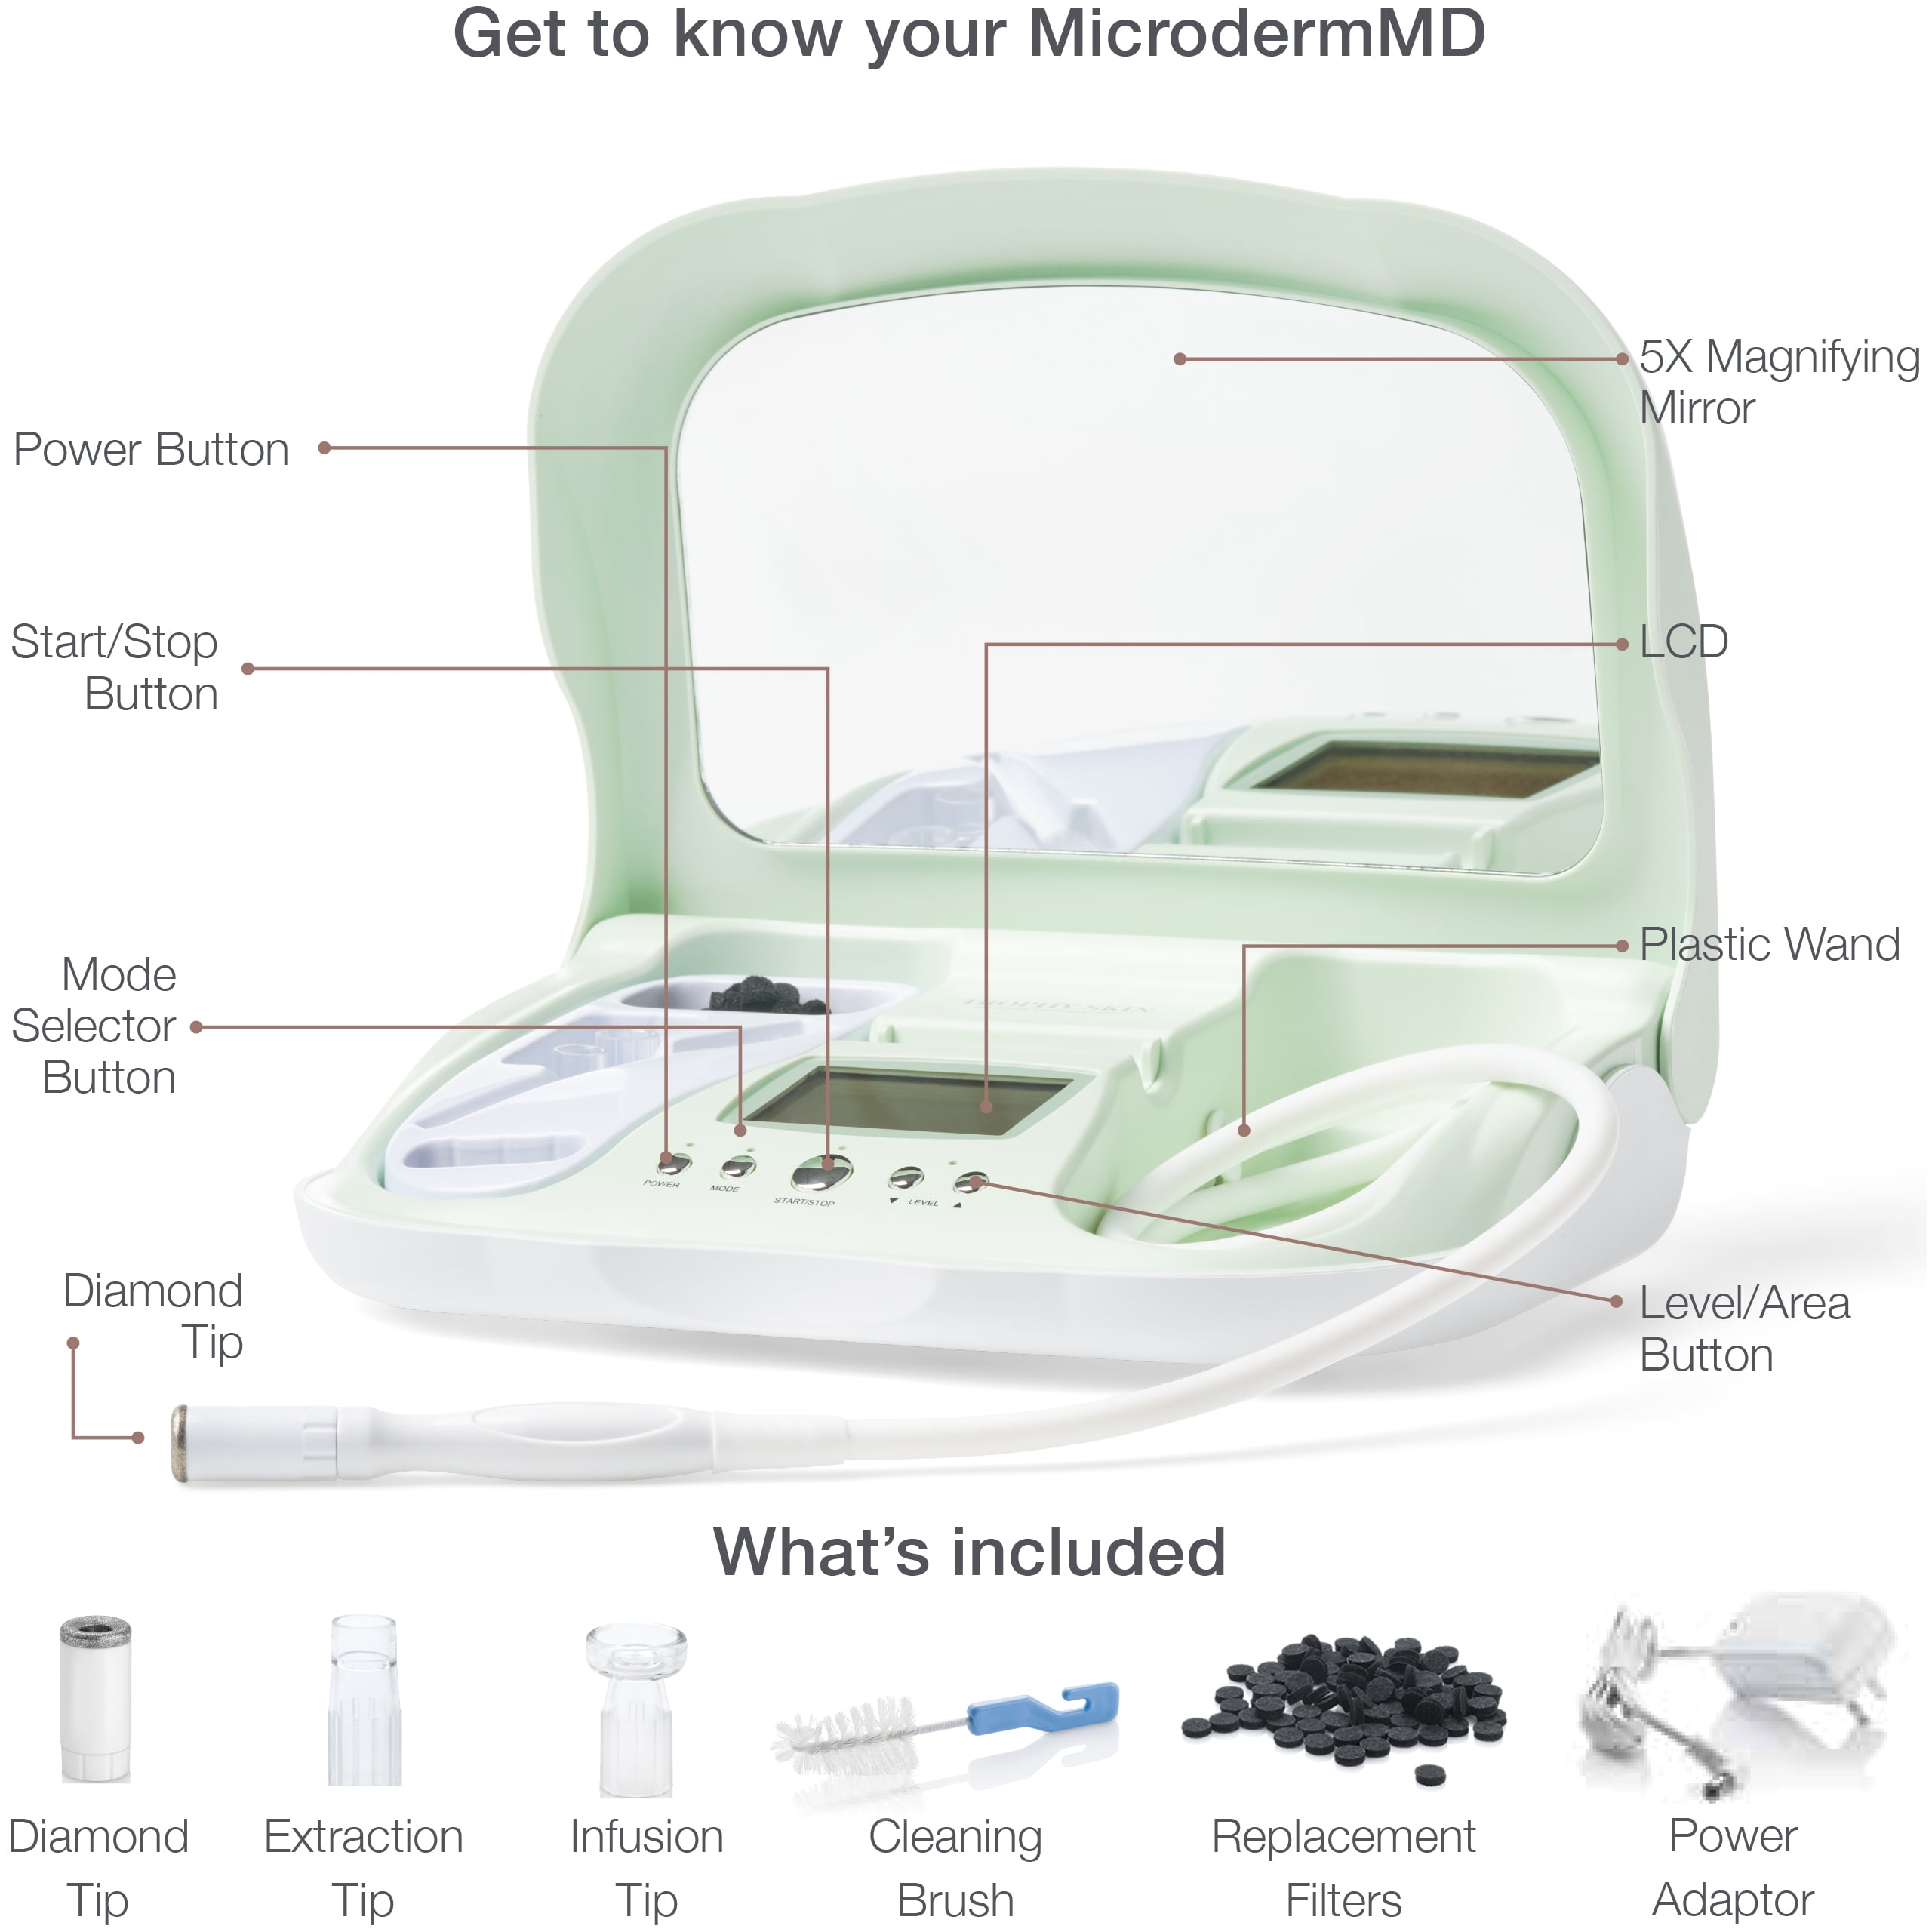 Trophy Skin MicrodermMD - At Home Microdermabrasion Kit - Anti Aging and  Acne Treatment - Contains Real Diamond and Pore Extractor Tips to  Rejuvenate Skin - White